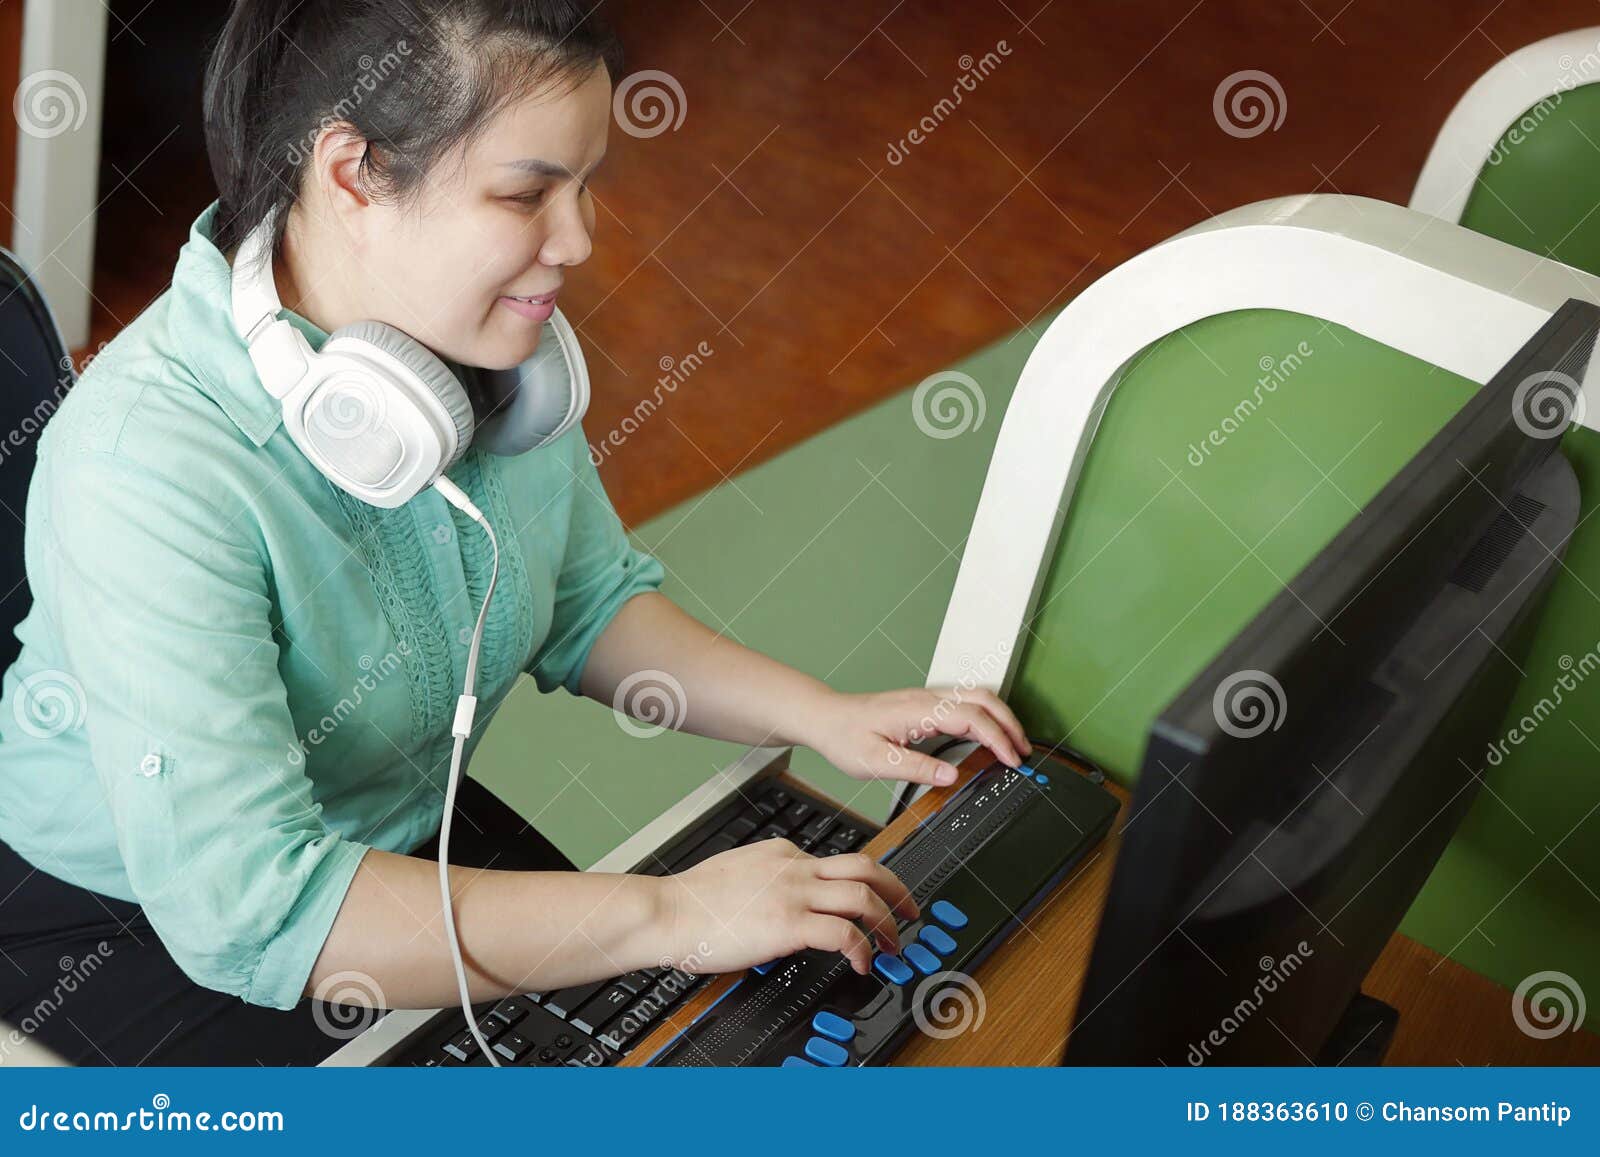 asian young blind woman with headphone using computer with refreshable braille display or braille terminal a technology device for